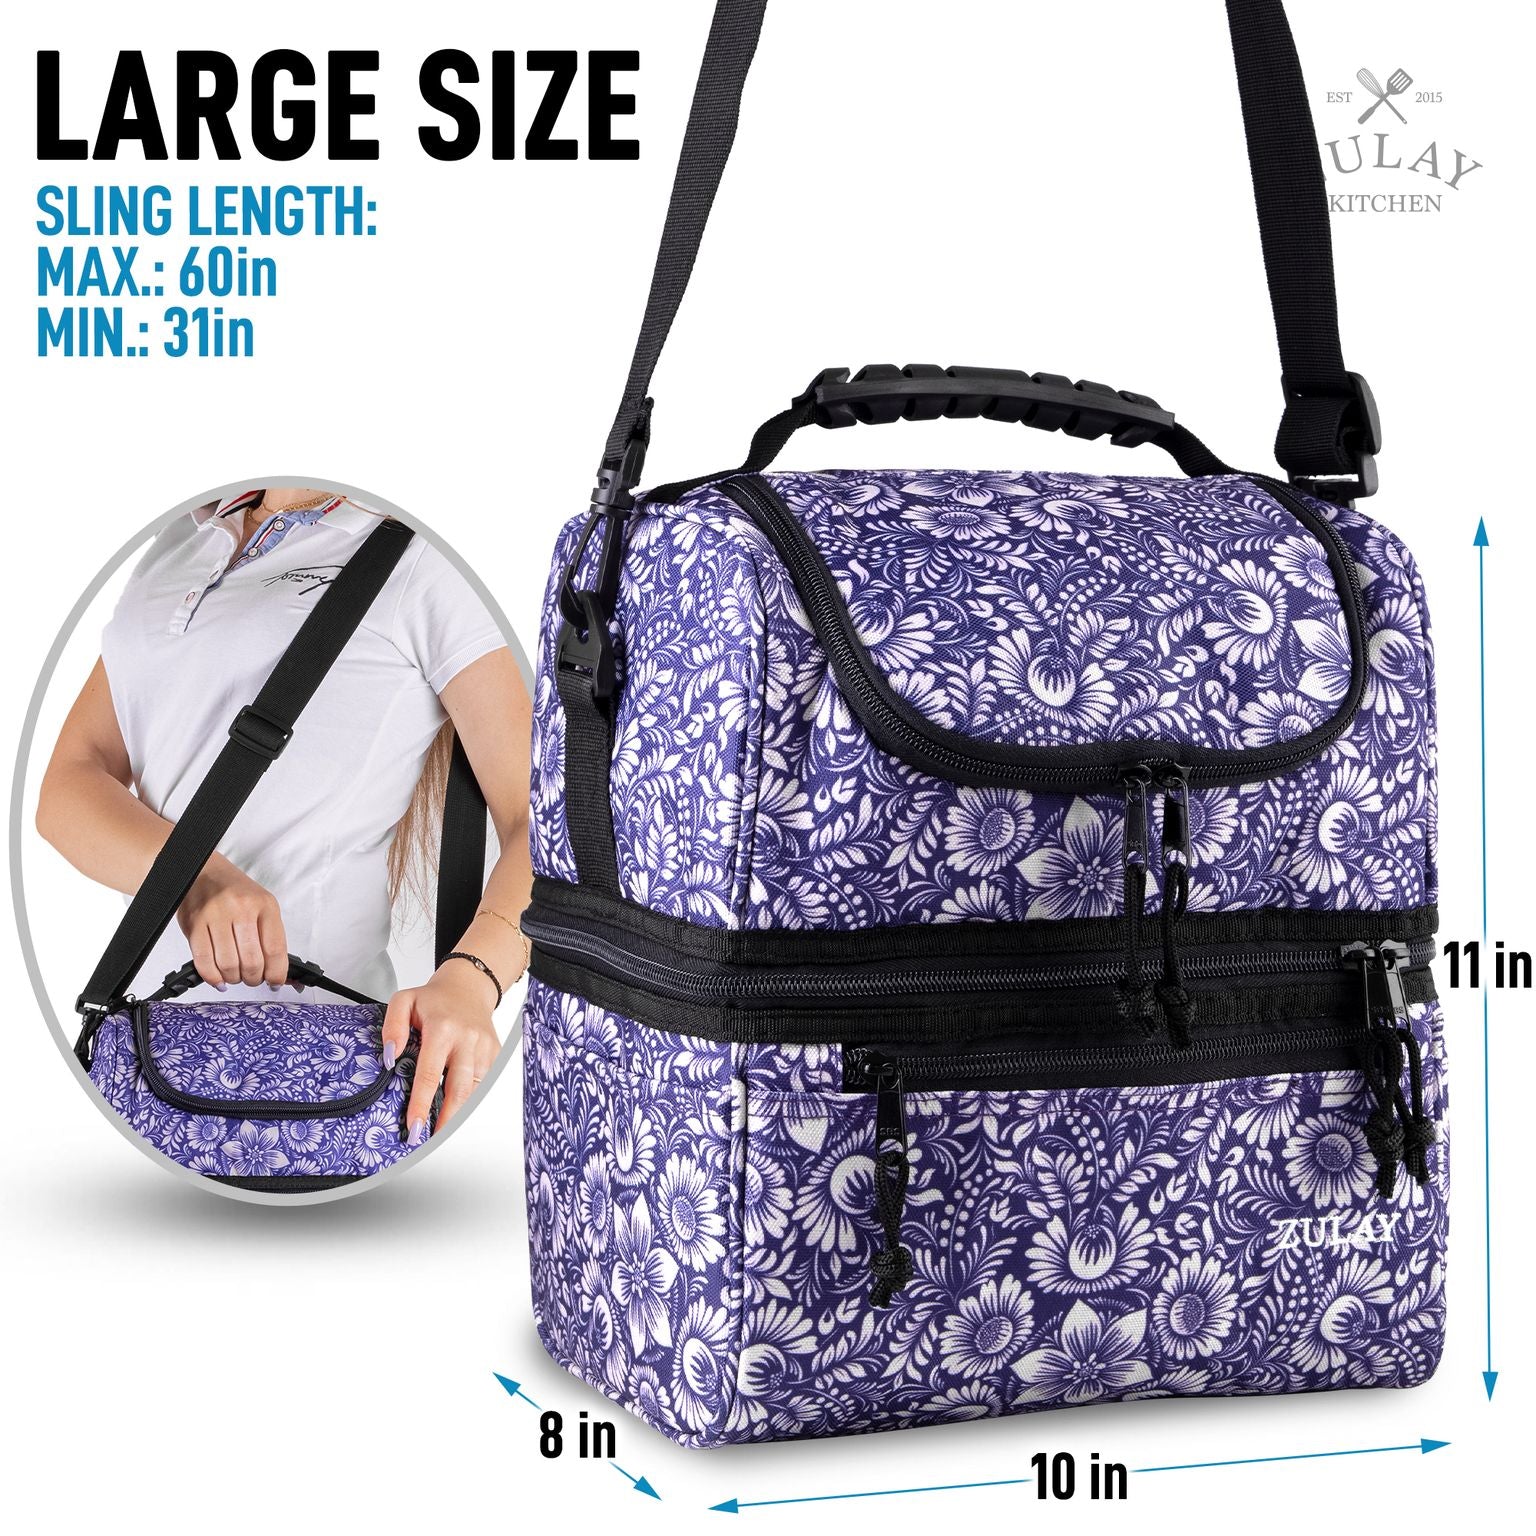 Zulay Kitchen Insulated 2-Compartment Lunch Box Bag With Strap - Caribbean  Blue, 1 - Kroger